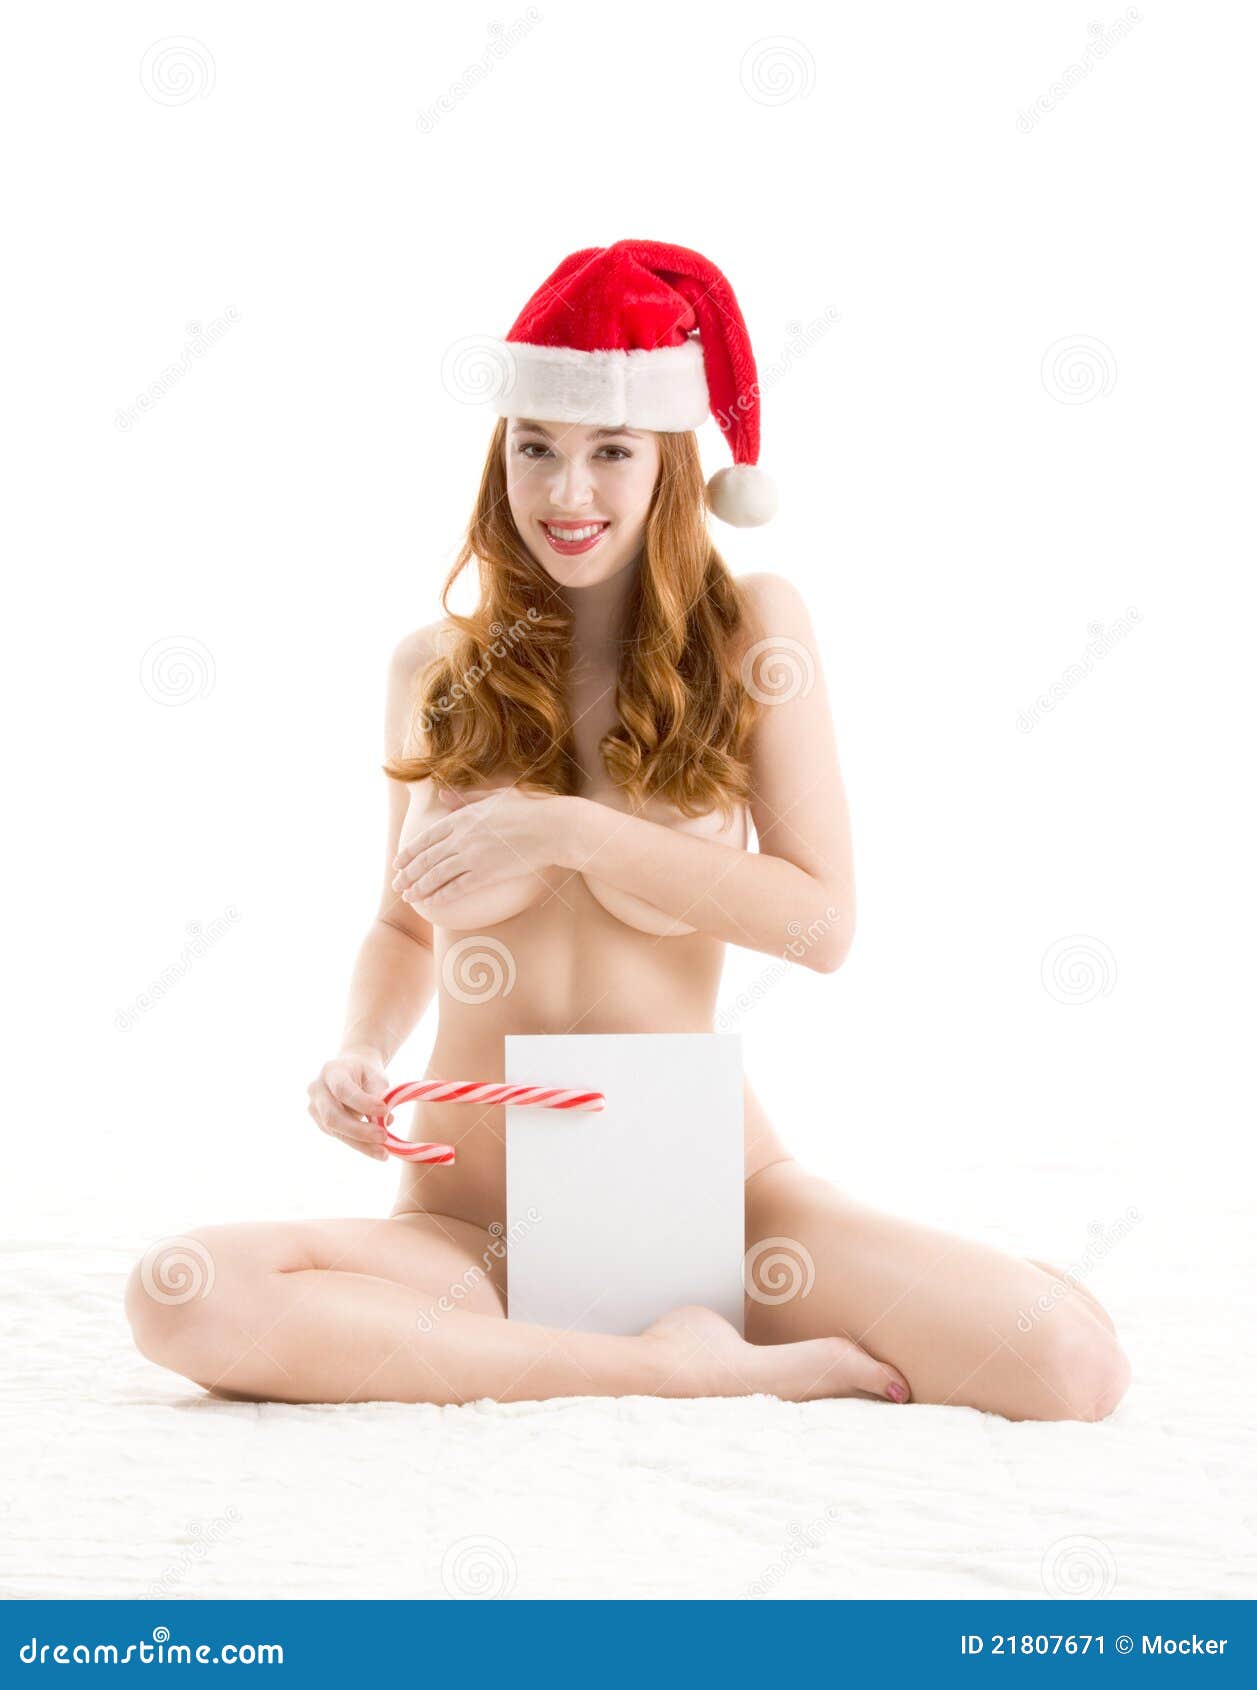 Ms claus nude